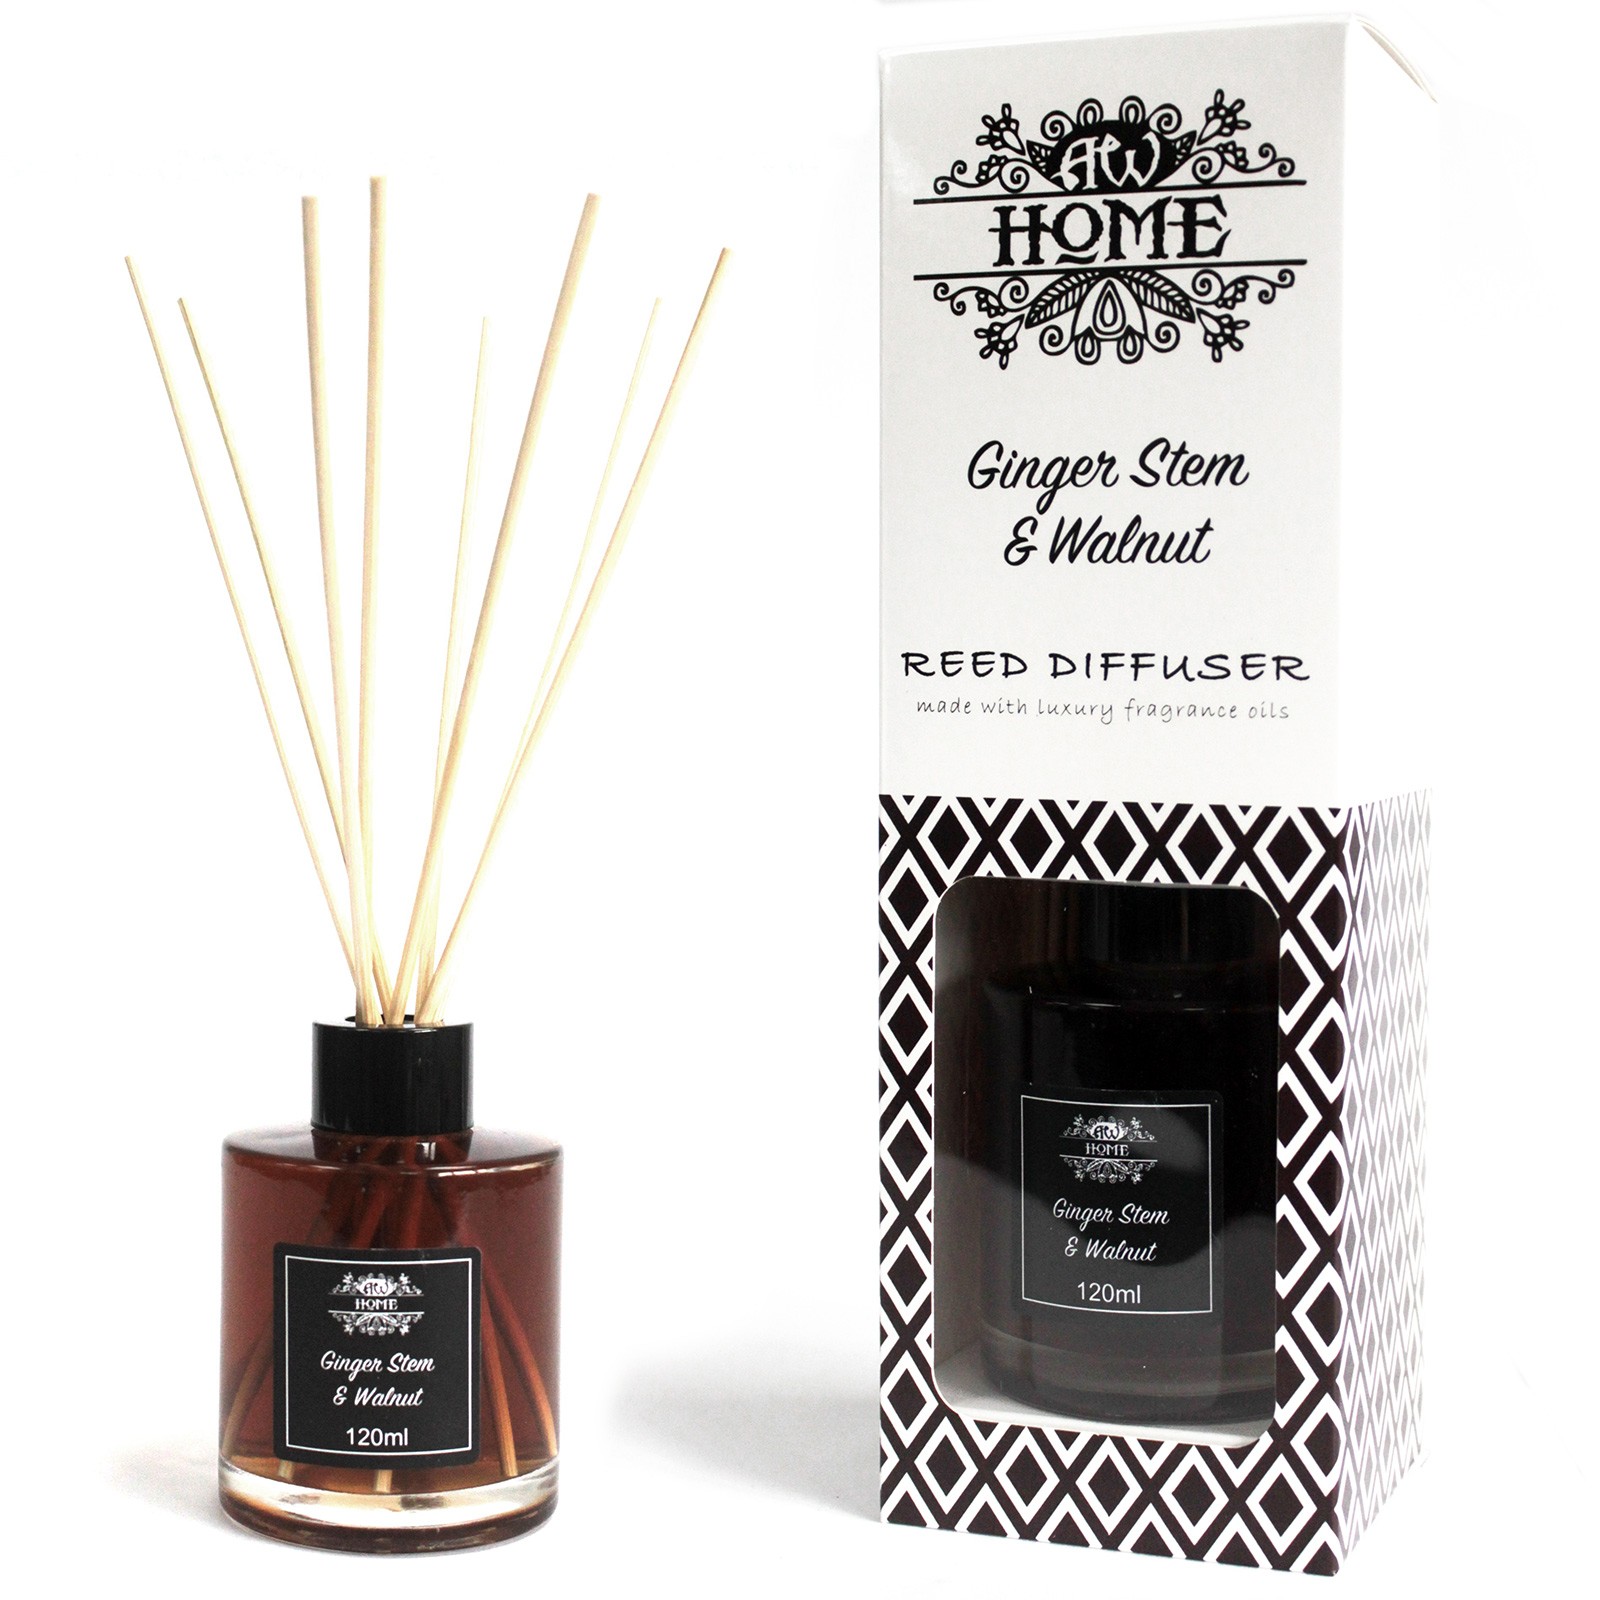 Ginger Stem and Walnut - 120ml Reed Diffuser